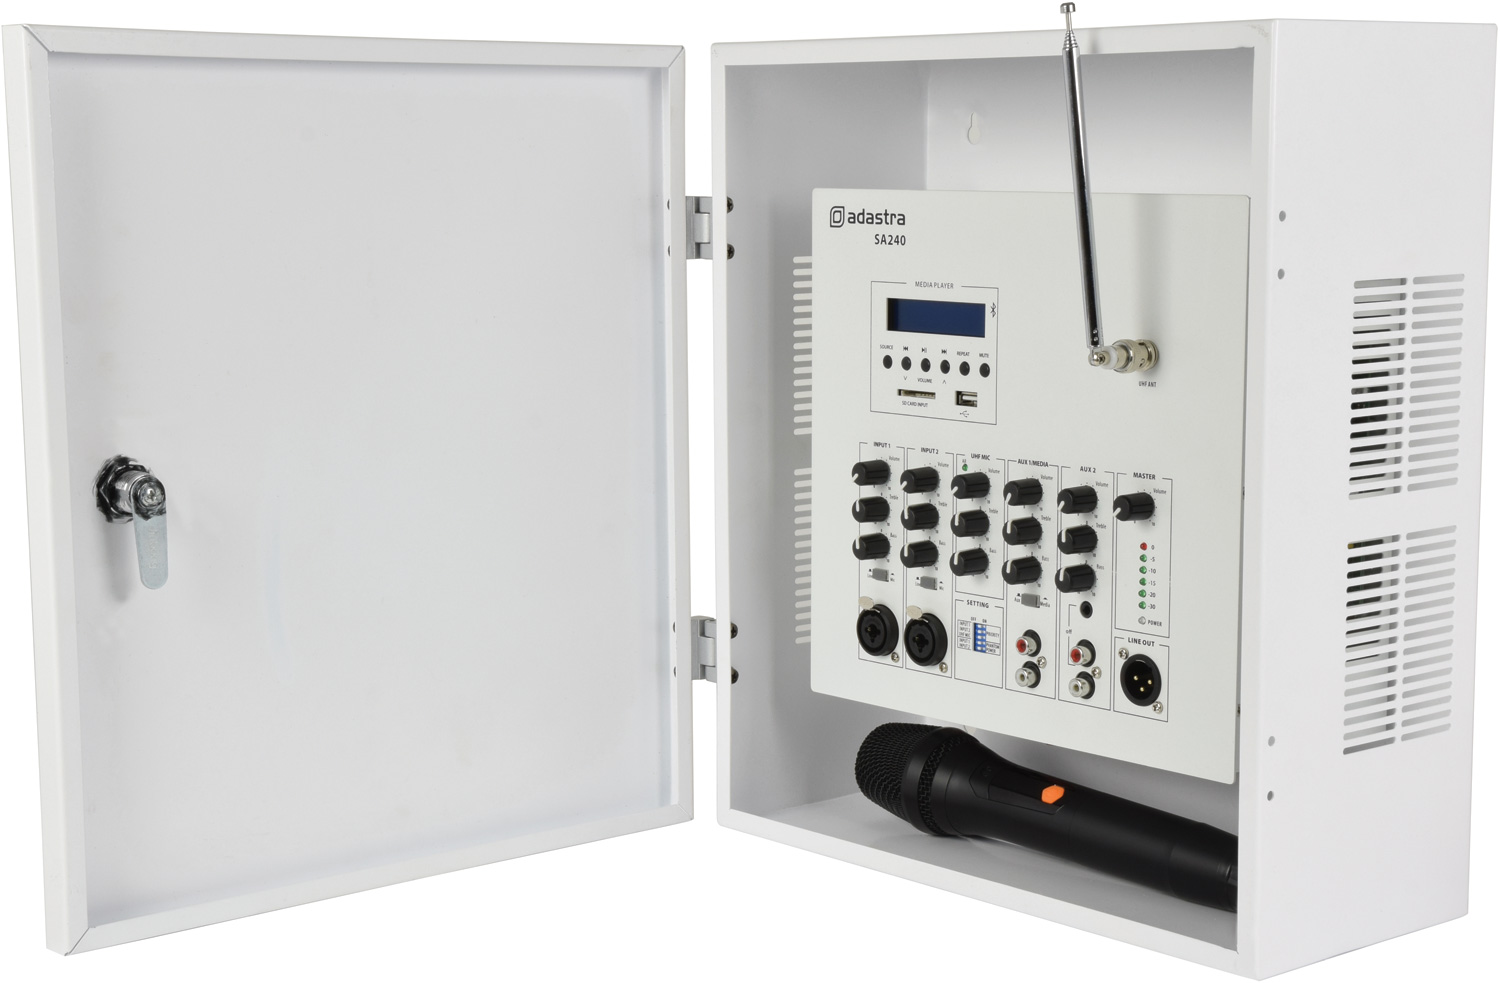 SA-Series Secure Wall Amplifier 100V With UHF Mic And Media Player